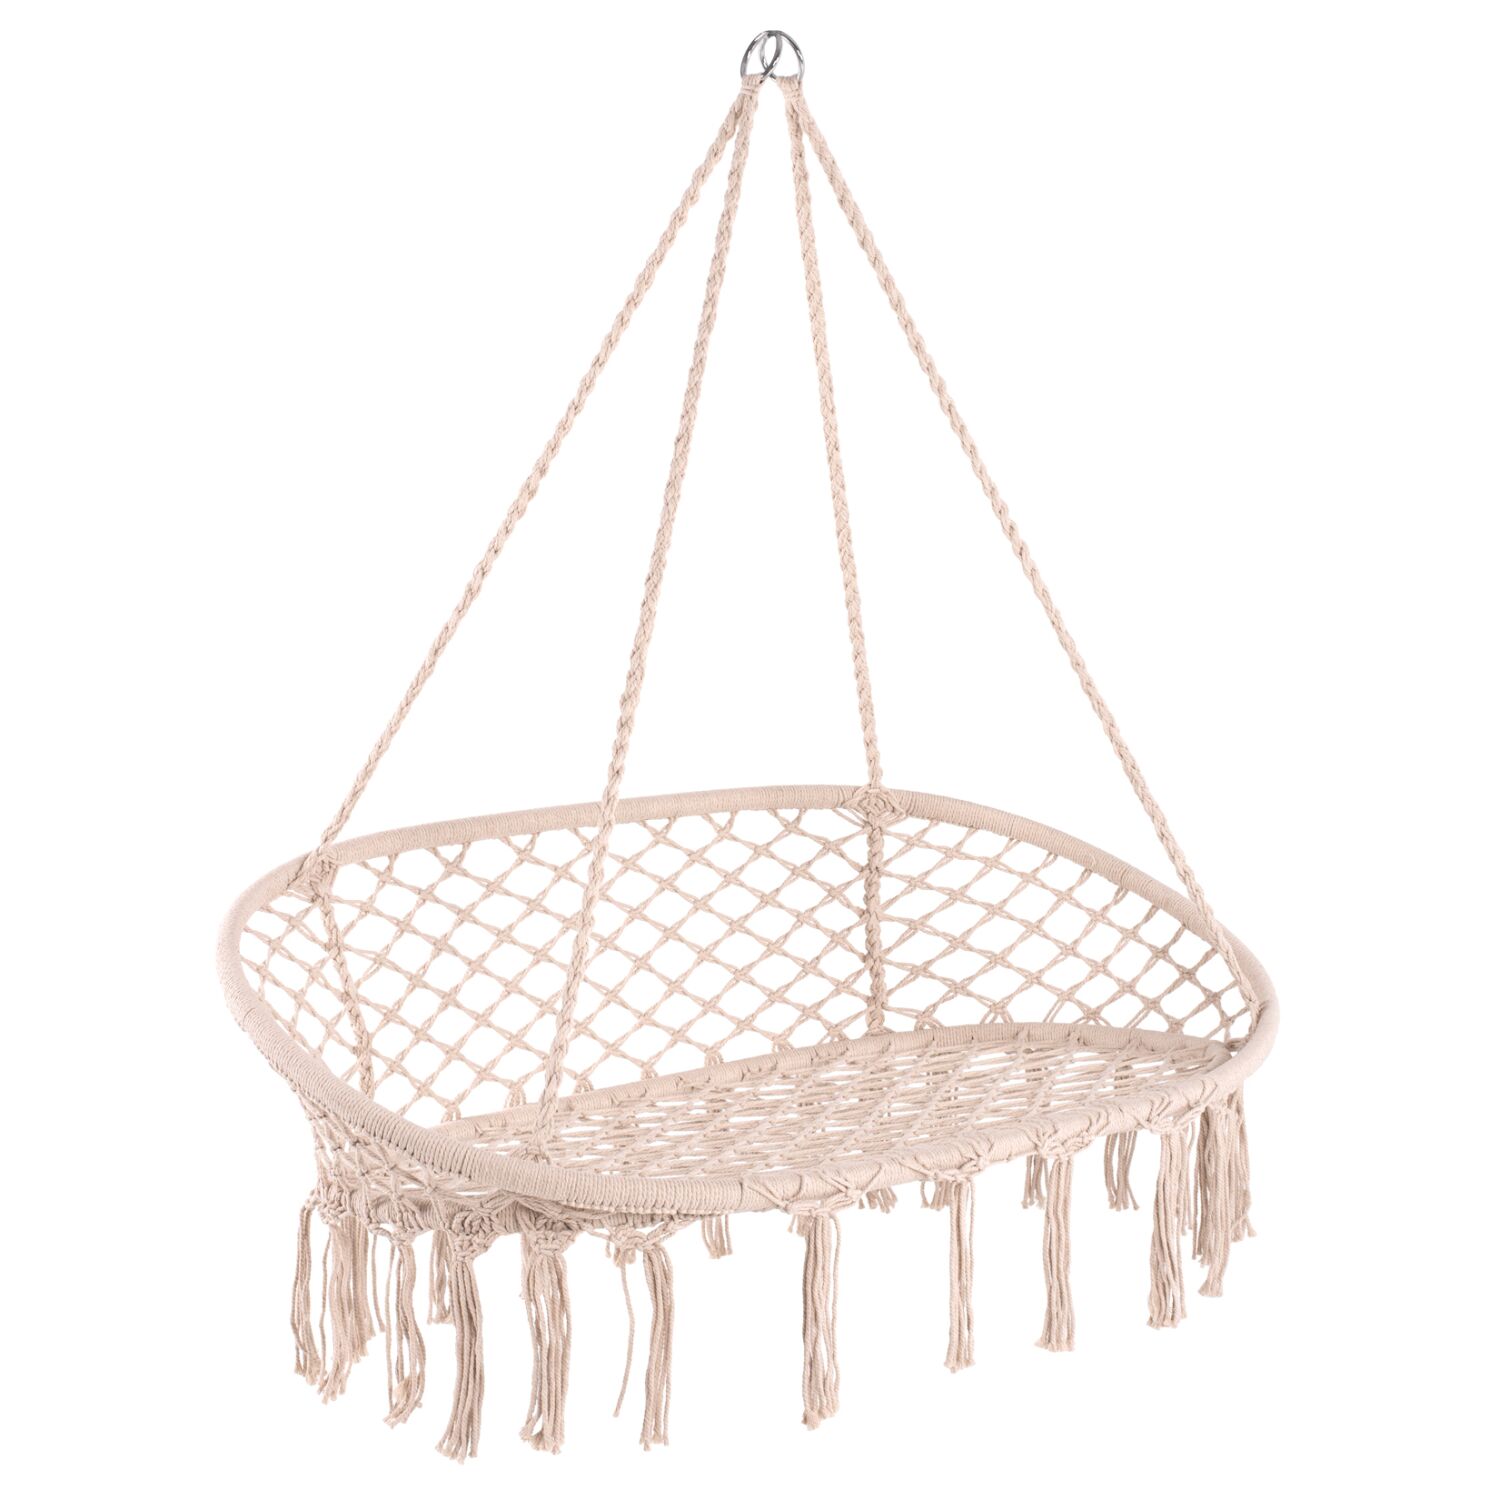 HANGING NEST HM5769 2-SEATER MACRAME ROPE IN BEIGE COLOR 130x67x120-140Hcm.